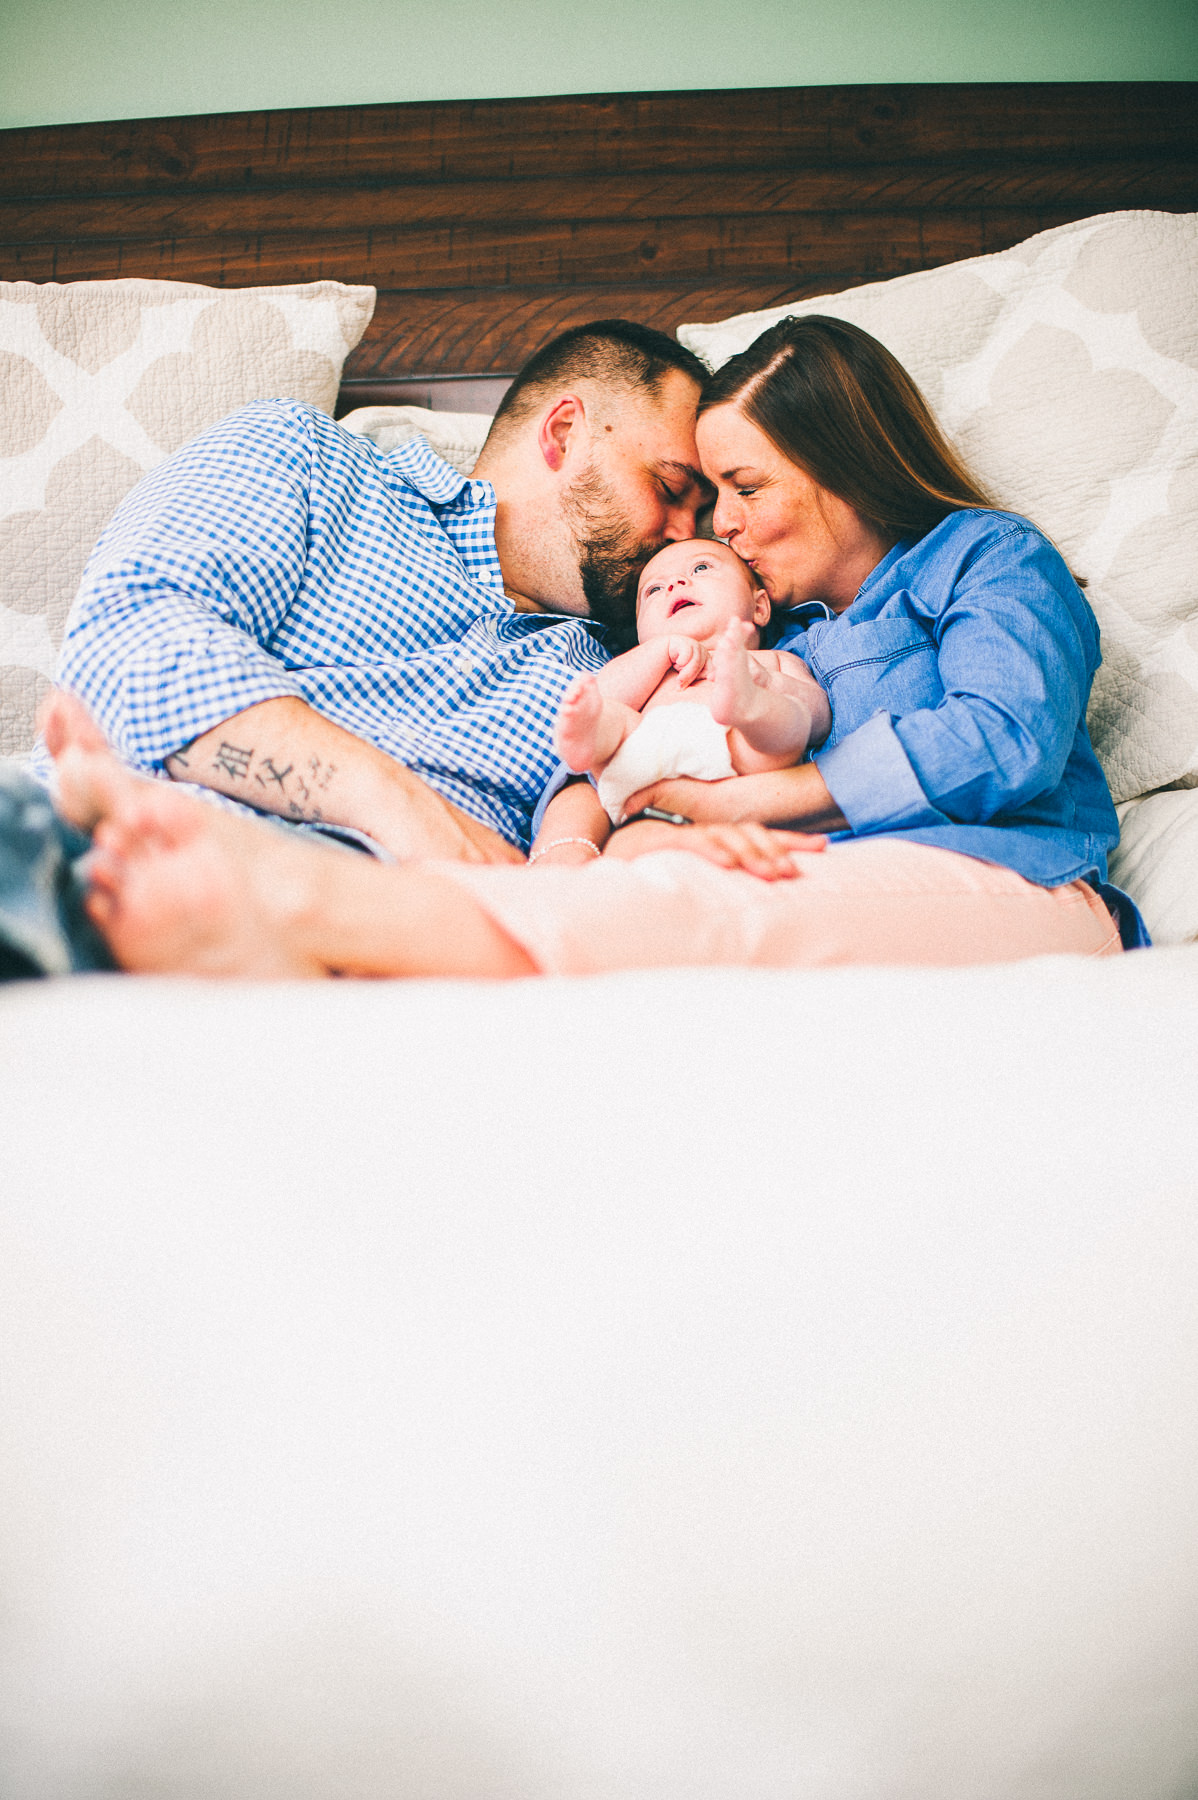 breighton-and-basette-photography-copyrighted-image-blog-croix-newborn-035.jpg